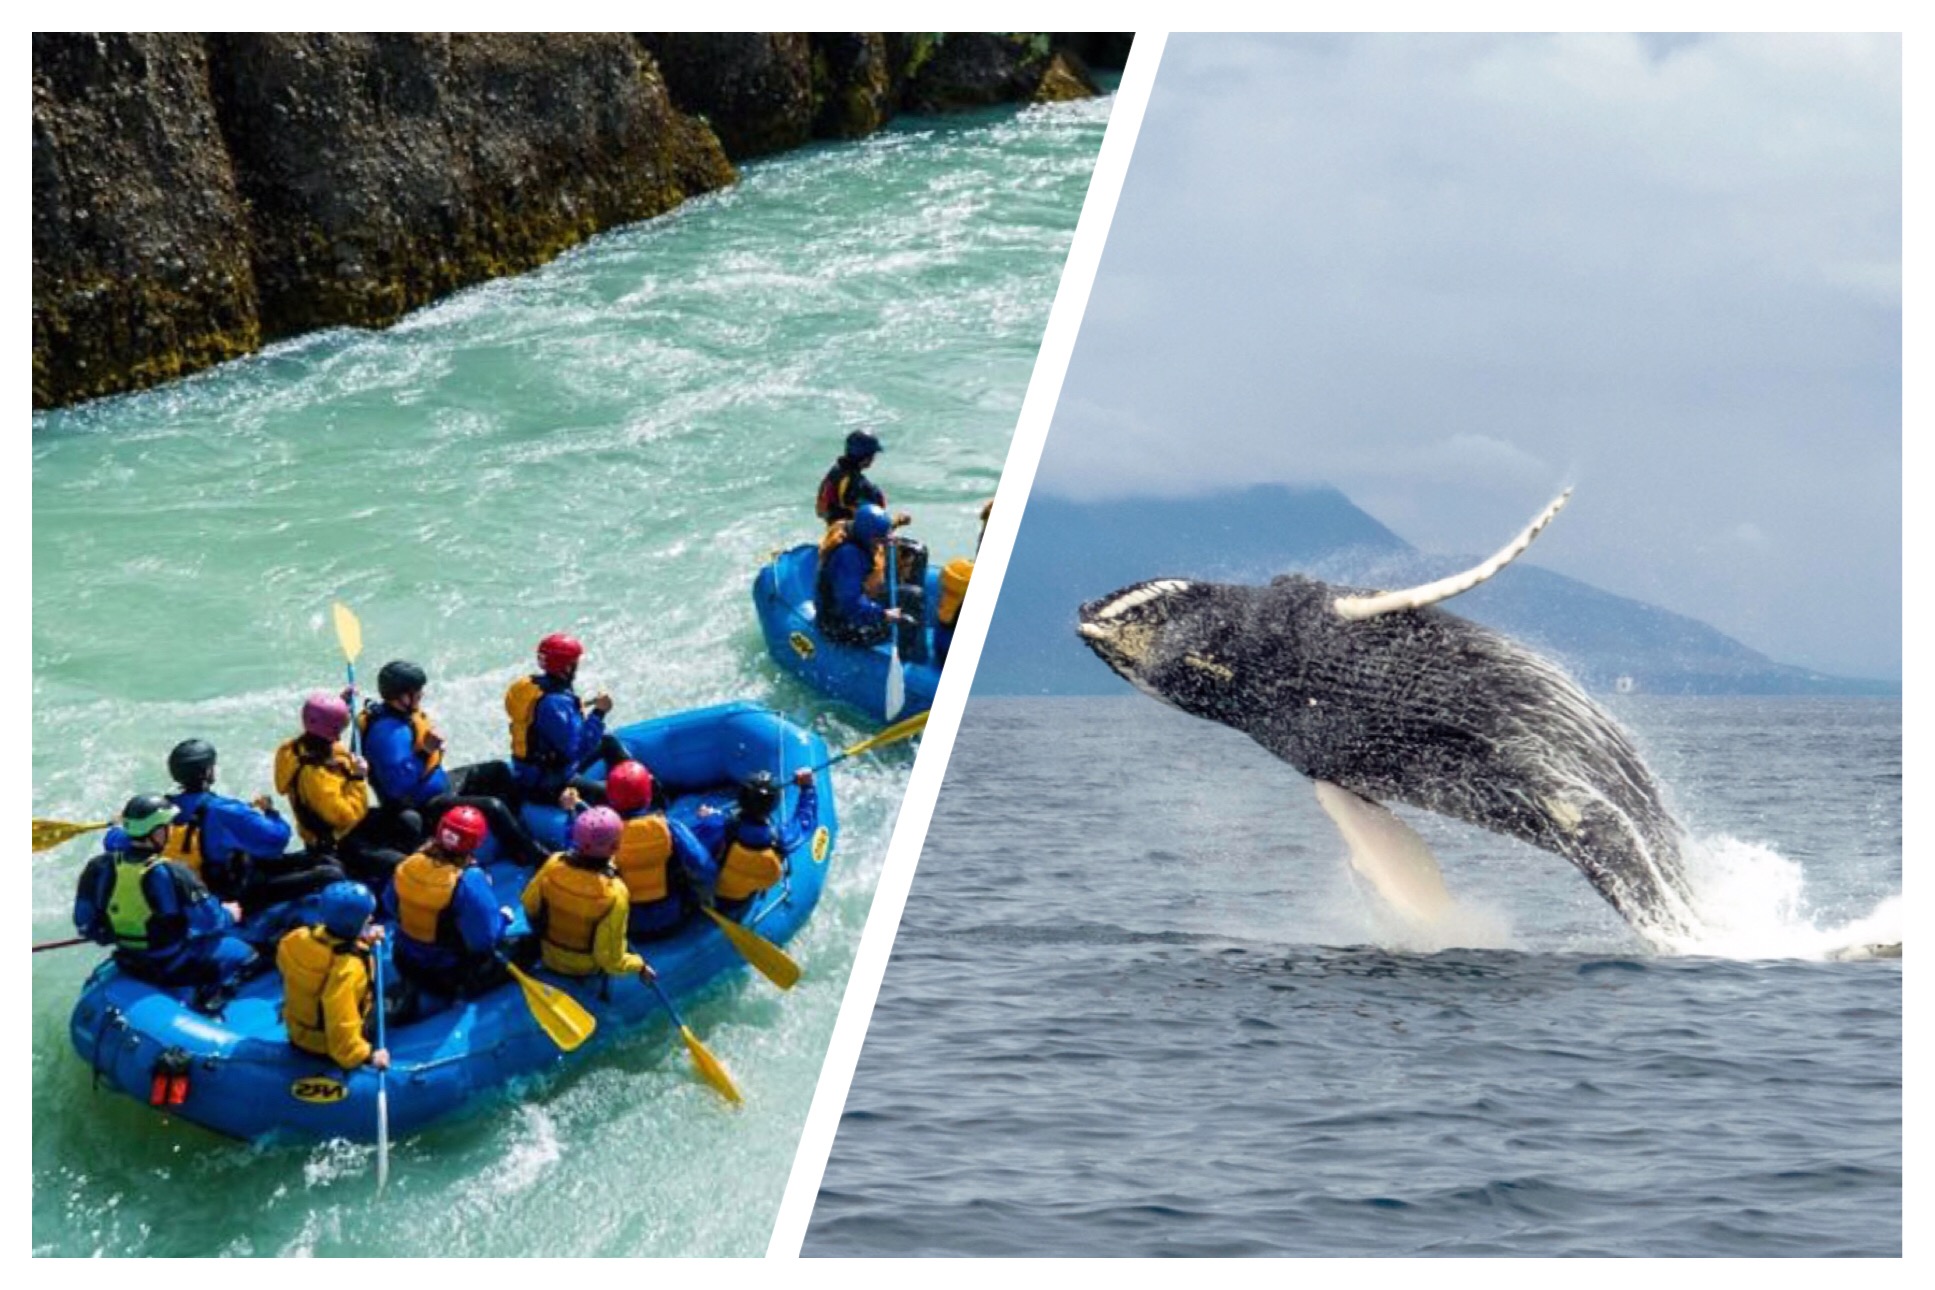 Dual image of people rafting on the Hvita river on the left and a humpback whale throwing itself up out of the water on the right.